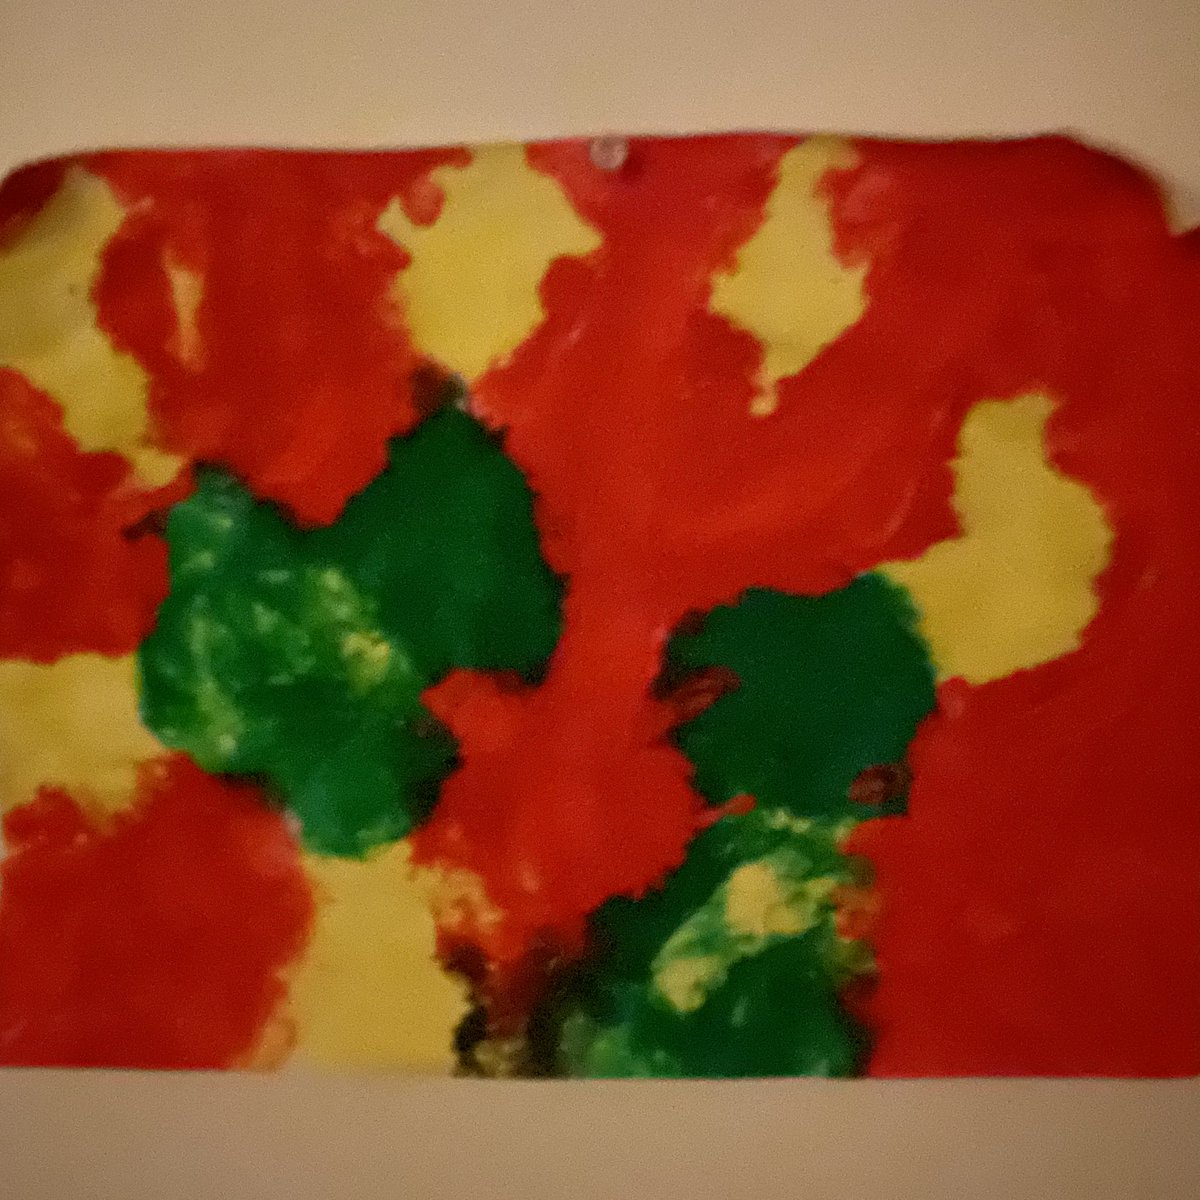 child's artwork. titled "pandemic" illustrating this. More red zones than I'd like. Or than I think there actually are but heck. It's art 7/n